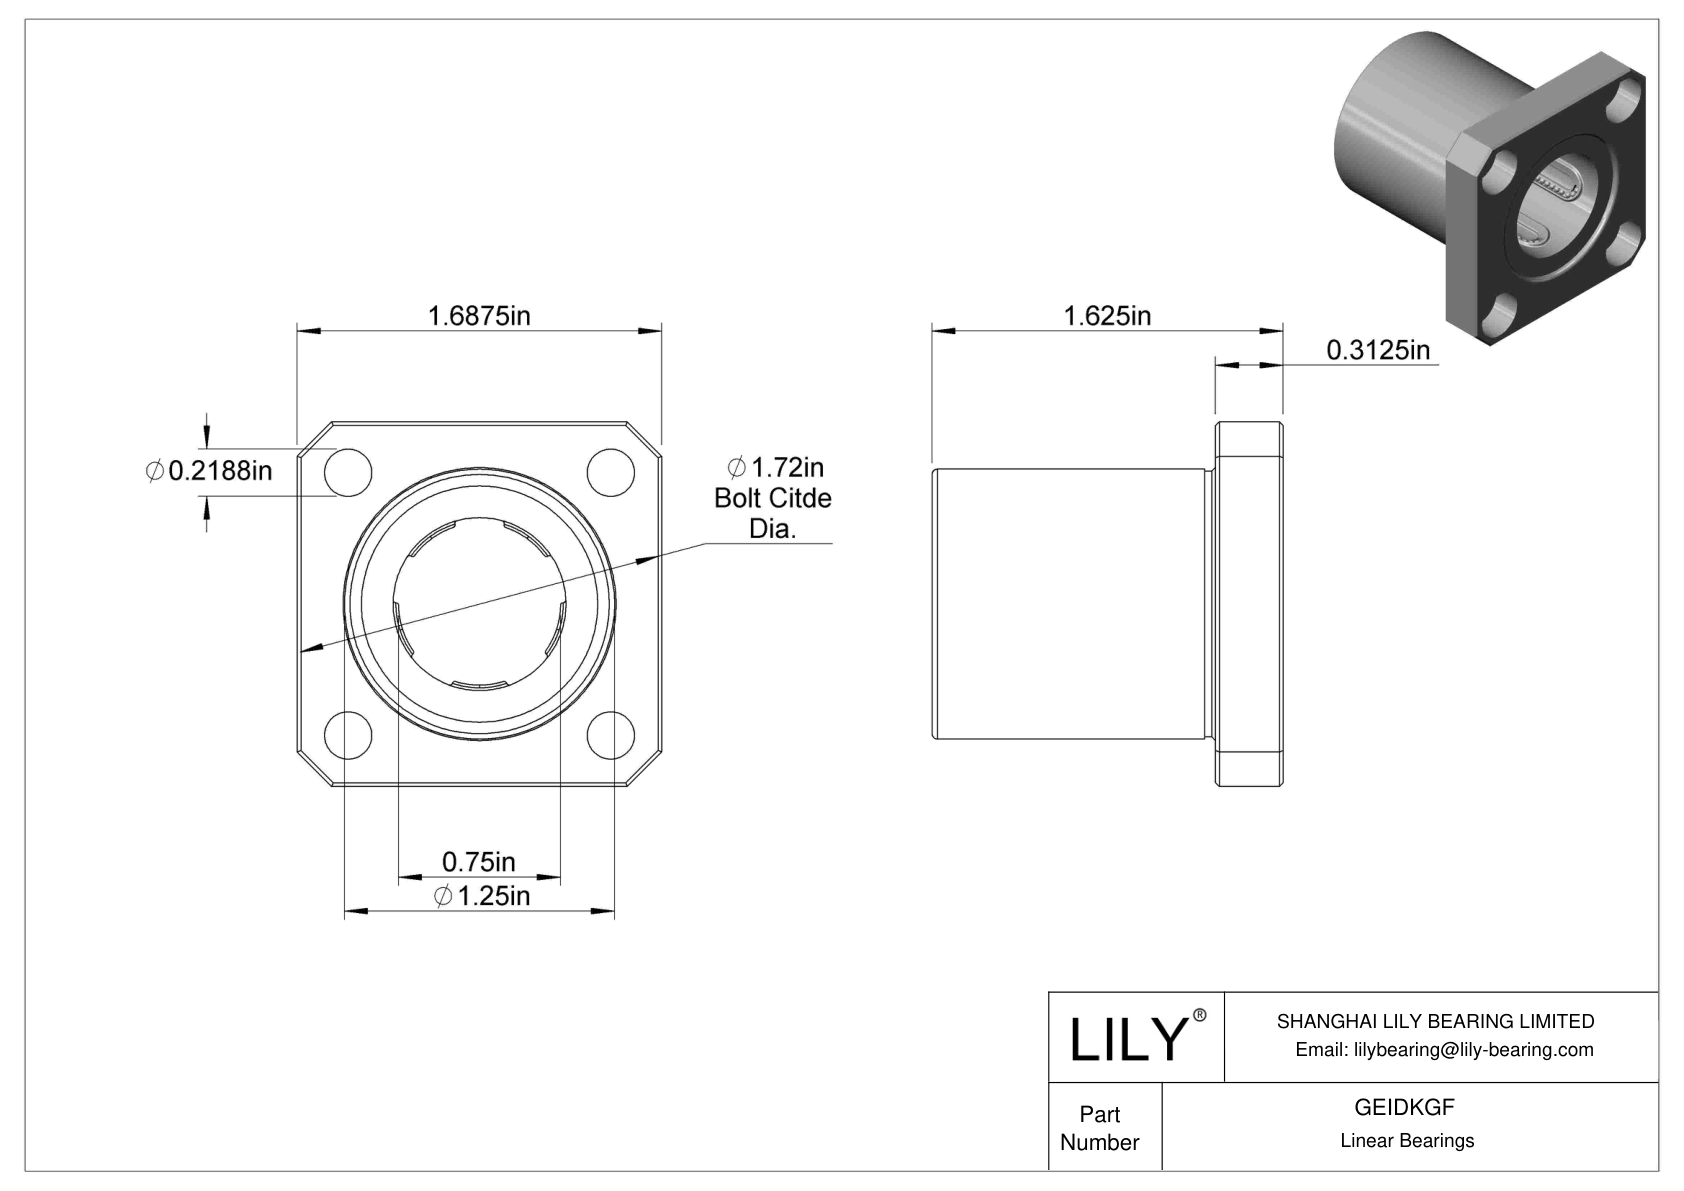 GEIDKGF Flange-Mounted Linear Ball Bearings cad drawing